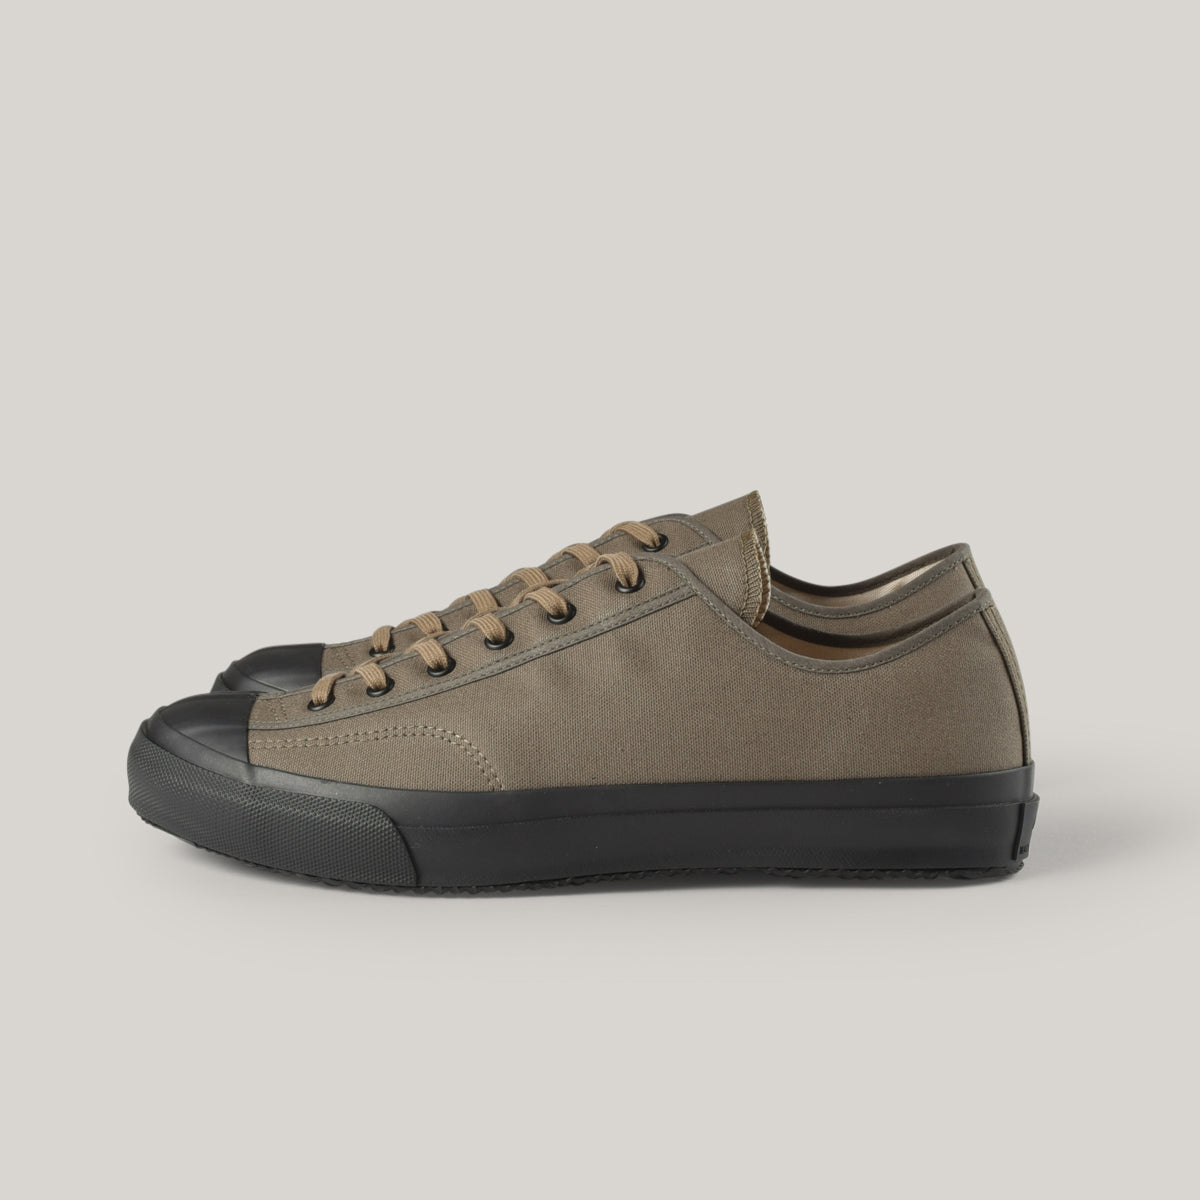 MOONSTAR GYM CLASSIC - OLIVE